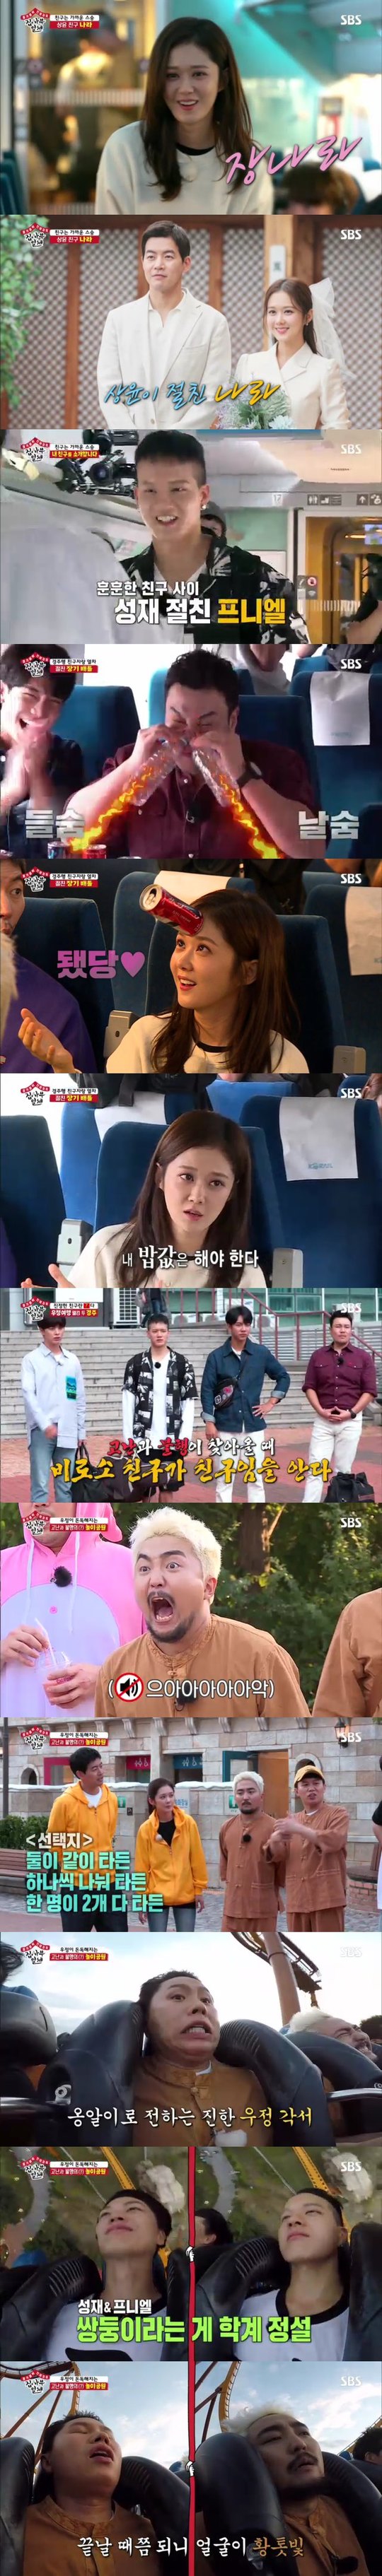 All The Butlers has made a friendship travel special look back on the true Friends meaning.According to Nielsen Korea, SBS All The Butlers furniture TV viewer ratings, which was broadcast on September 22, recorded 7.3% (subdivision 2 of the metropolitan area) and 2049 target TV viewer ratings, which were collected for young viewers aged 20 to 49, recorded a whopping 3.7%.Top TV viewer ratings per minute soared to 8.4 per cent.The broadcast was featured on the Friend Masters special feature, and a moisturizing trip to Gyeongju was revealed with friends invited by Lee Seung-gi, Lee Sang-yoon, Yang Se-hyeong and Yook Sungjae.The members invited Friend, who had the most to learn. Lee Sang-yoon said of Friend, who he invited, Personality is not insane.It is serious, he said. It is a friend with many talents in various fields.With the question of who the invited Friend would be, the actor Jang Na-ra, the friend of Lee Sang-yoon, first appeared and led the cheers of the members.I was a bit serious and uninterested, so I was not good at entertainment (Lee Sang-yoon) and told me not to worry.I said I will take care of everything. Then Jang Na-ra said, I feel like this boss on my team, Lee Sang-yoon, who is breathing in the drama VIP to be broadcast.I am going to do it and it is the funniest thing on our team. Followed by Friend Yoo Byung-jae of Yang Se-hyeong, Friend actor Shin Seung-Hwan of Lee Seung-gi, and Friend Bitoubi Peniel Shin of Yook Sungjae.Lee Seung-gi said that Shin Seung-Hwans advantage was a good catcher.Shin Seung-Hwan, nicknamed Jung Seung-hwan, showed his organs by blowing a PET bottle with his nose and attaching a can to his forehead.However, Yoo Byung-jae also easily blew a PET bottle with his nose, followed by Jang Na-ra, who succeeded in two organs and intercepted everyones applause.Jang Na-ra, meanwhile, handed out his favorite snack, the sweetened jelly, to the members, who added, I ate this the day I shot it.Yoo Byung-jae asked, I have been around for nearly 20 years and I still feel nervous. Jang Na-ra replied, The more you do, the worse you get.Lee Sang-yoon, who saw Jang Na-ra, said, Jang Na-ra is always very sorry when I do NG. Jang Na-ra always thinks, I have to pay for my rice and take responsibility.Jang Na-ra said, I will have the capacity and role I expect while casting, but I am always nervous that I will not be able to do it.The crew introduced the members and friends who arrived in Gyeongju to the Friends, saying, I know Friend is Friend only when hardship and misfortune come.The members were worried about the mission to be given in the future, and Yang Se-hyeong explained the Chinese character of Danger and said, It may be Danger or an opportunity.So lets think about friendship travel today and think about it in a good way. Since then, they have been wearing a couple of couples shared through friendship tests and visited the amusement park.The mission given at the amusement park was to share two pairs: Roller Coaster, which falls vertically to 90 degrees, and Roller Coaster, which is not foothold.Lee Seung-gi and Shin Seung-Hwan, who won the pre-game, were excluded from the boarding list, while Yook Sungjae and Peniel Shin, Yang Se-hyeong and Yoo Byung-jae decided to ride two Roller Coaster together.Park Su-in